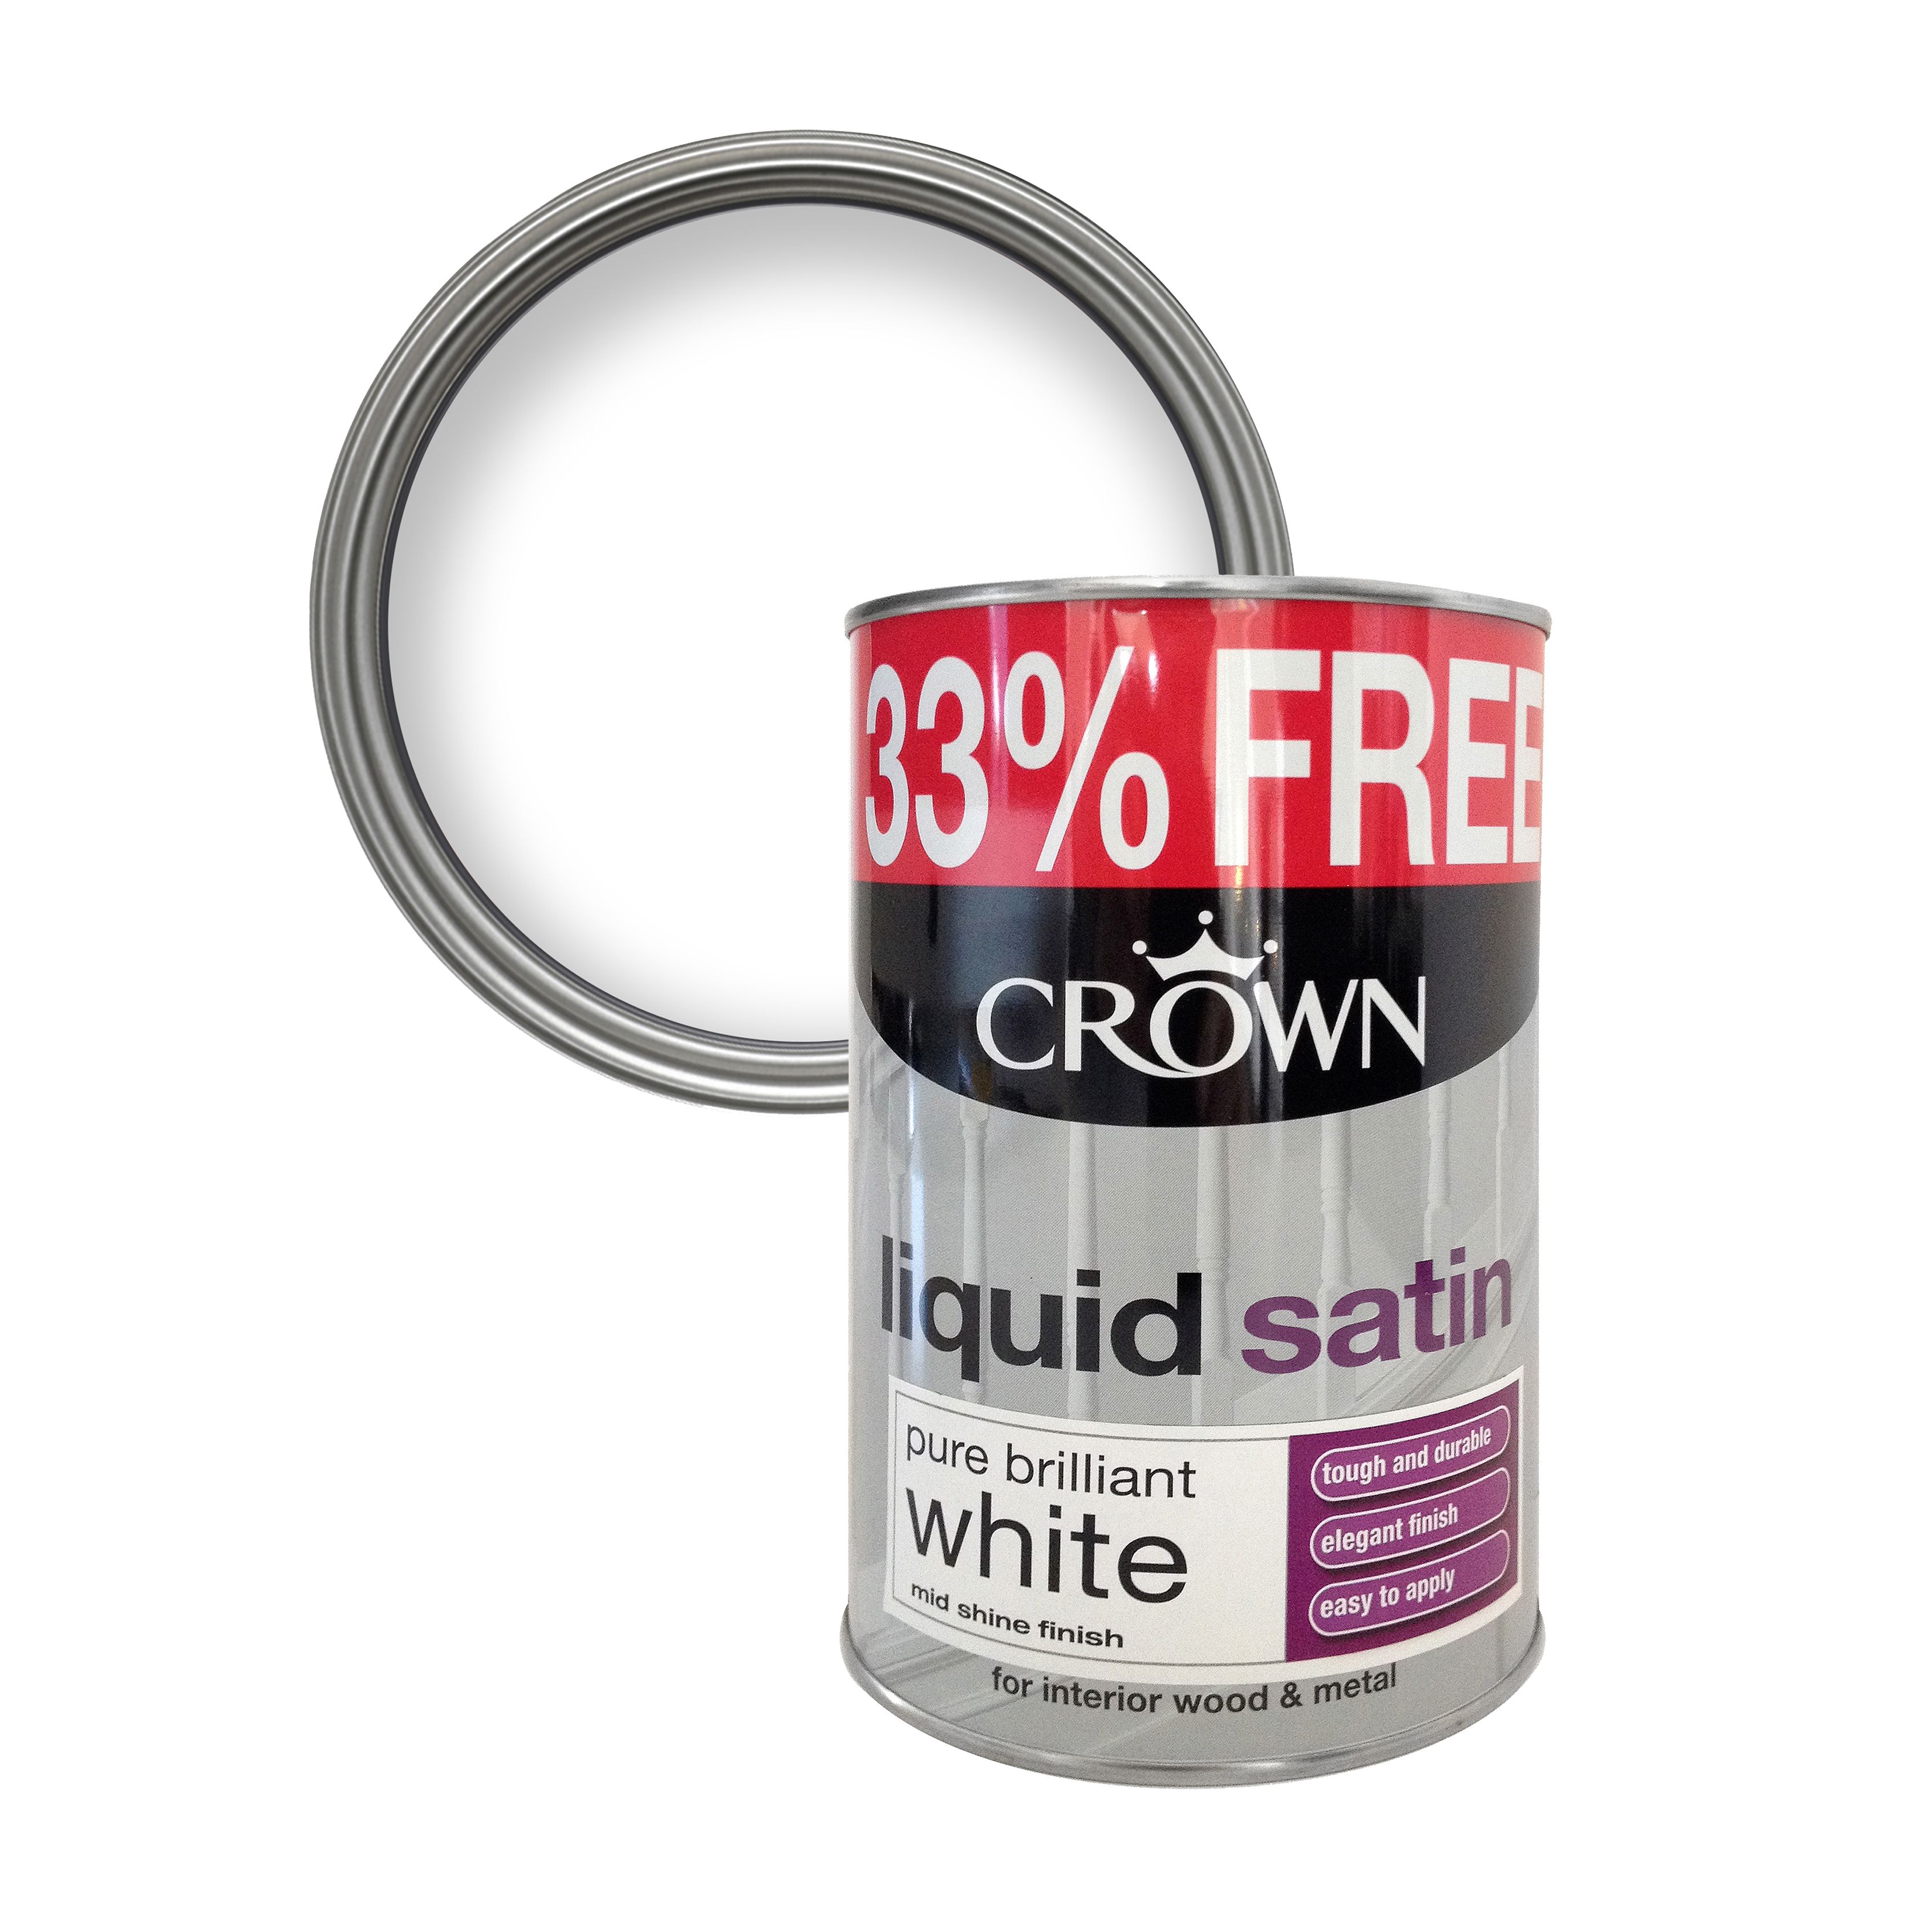 Crown Pure Brilliant White Satinwood Paint 1l~5010131472213 01c Bq?$MOB PREV$&$width=768&$height=768